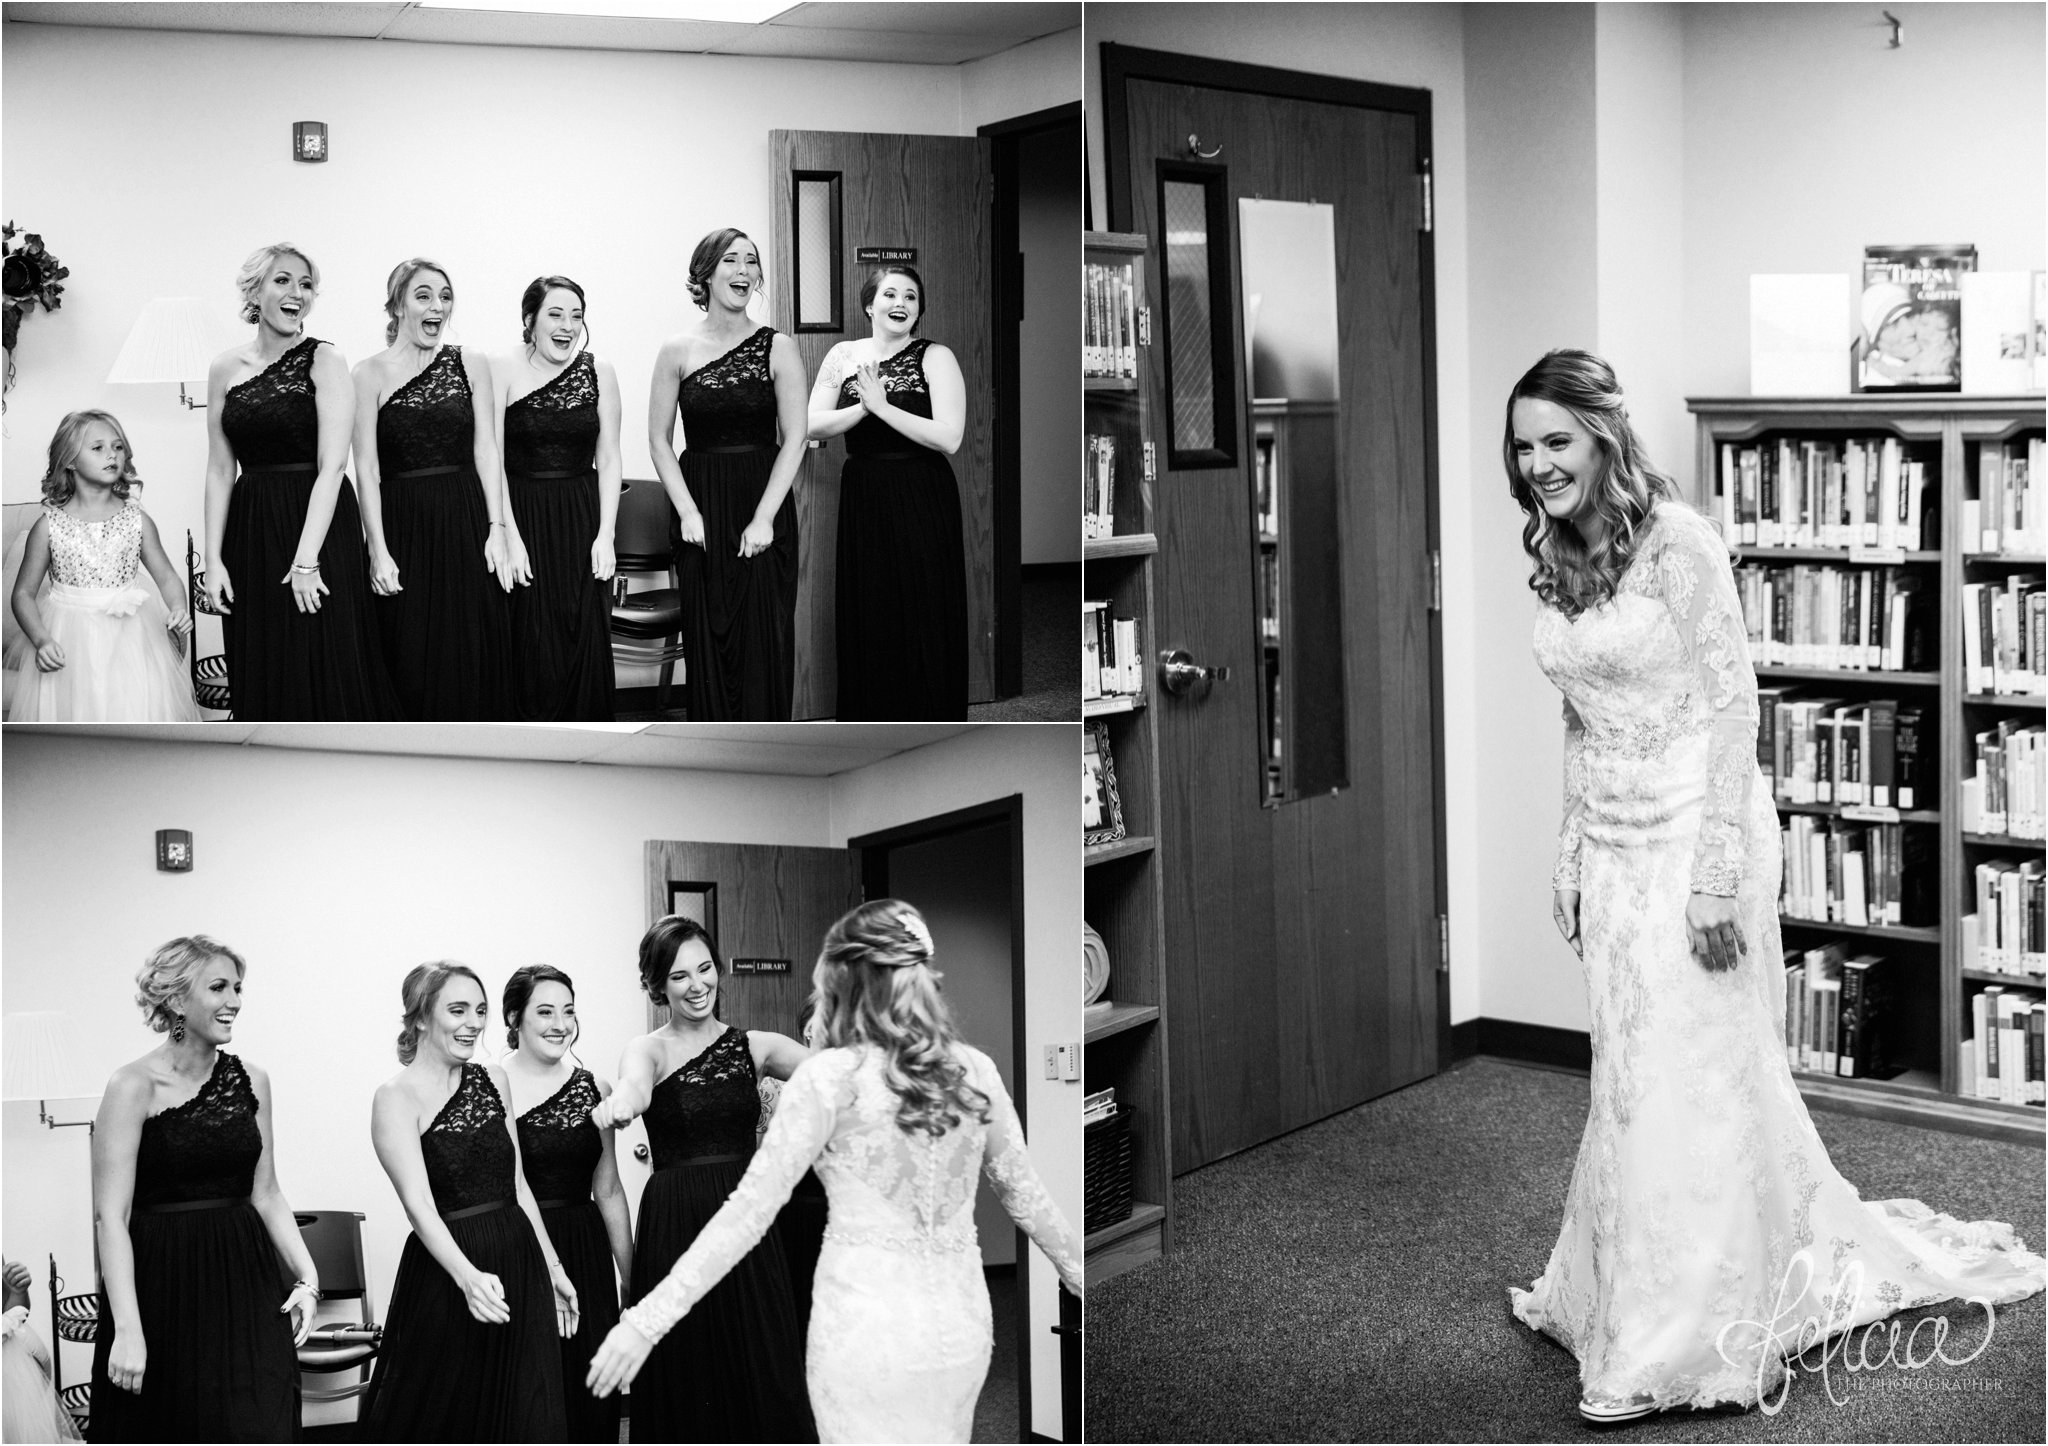 black and white | weddings | wedding photos | wedding photography | images by feliciathephotographer.com | St. Therese Catholic Church | Kansas City | downtown | The Terrace on Grand | wedding prep | getting ready | bridesmaids | flower girl | long bridesmaid dresses | David's Bridal | bride reveal | bridesmaid reaction | candid | Maggie Soterro | The Gown Gallery 